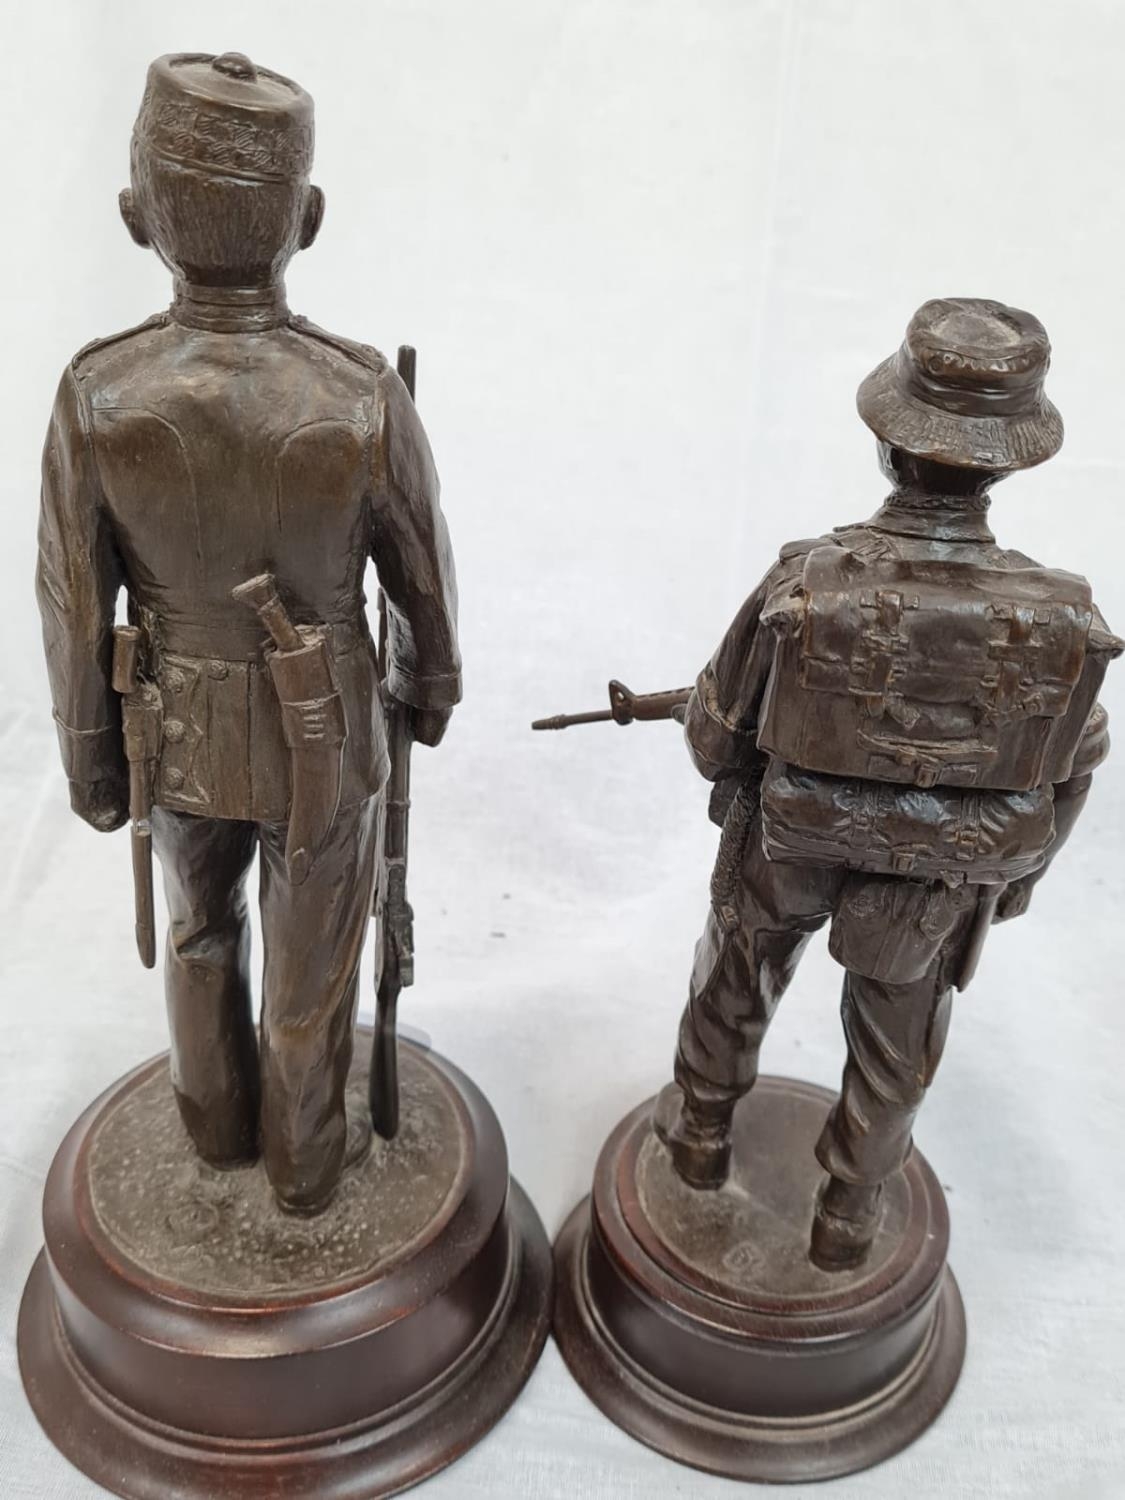 2 x cold cast bronze figures by Peter Hicks depicting Gurkha soldiers, one of the Victorian era - Image 4 of 5